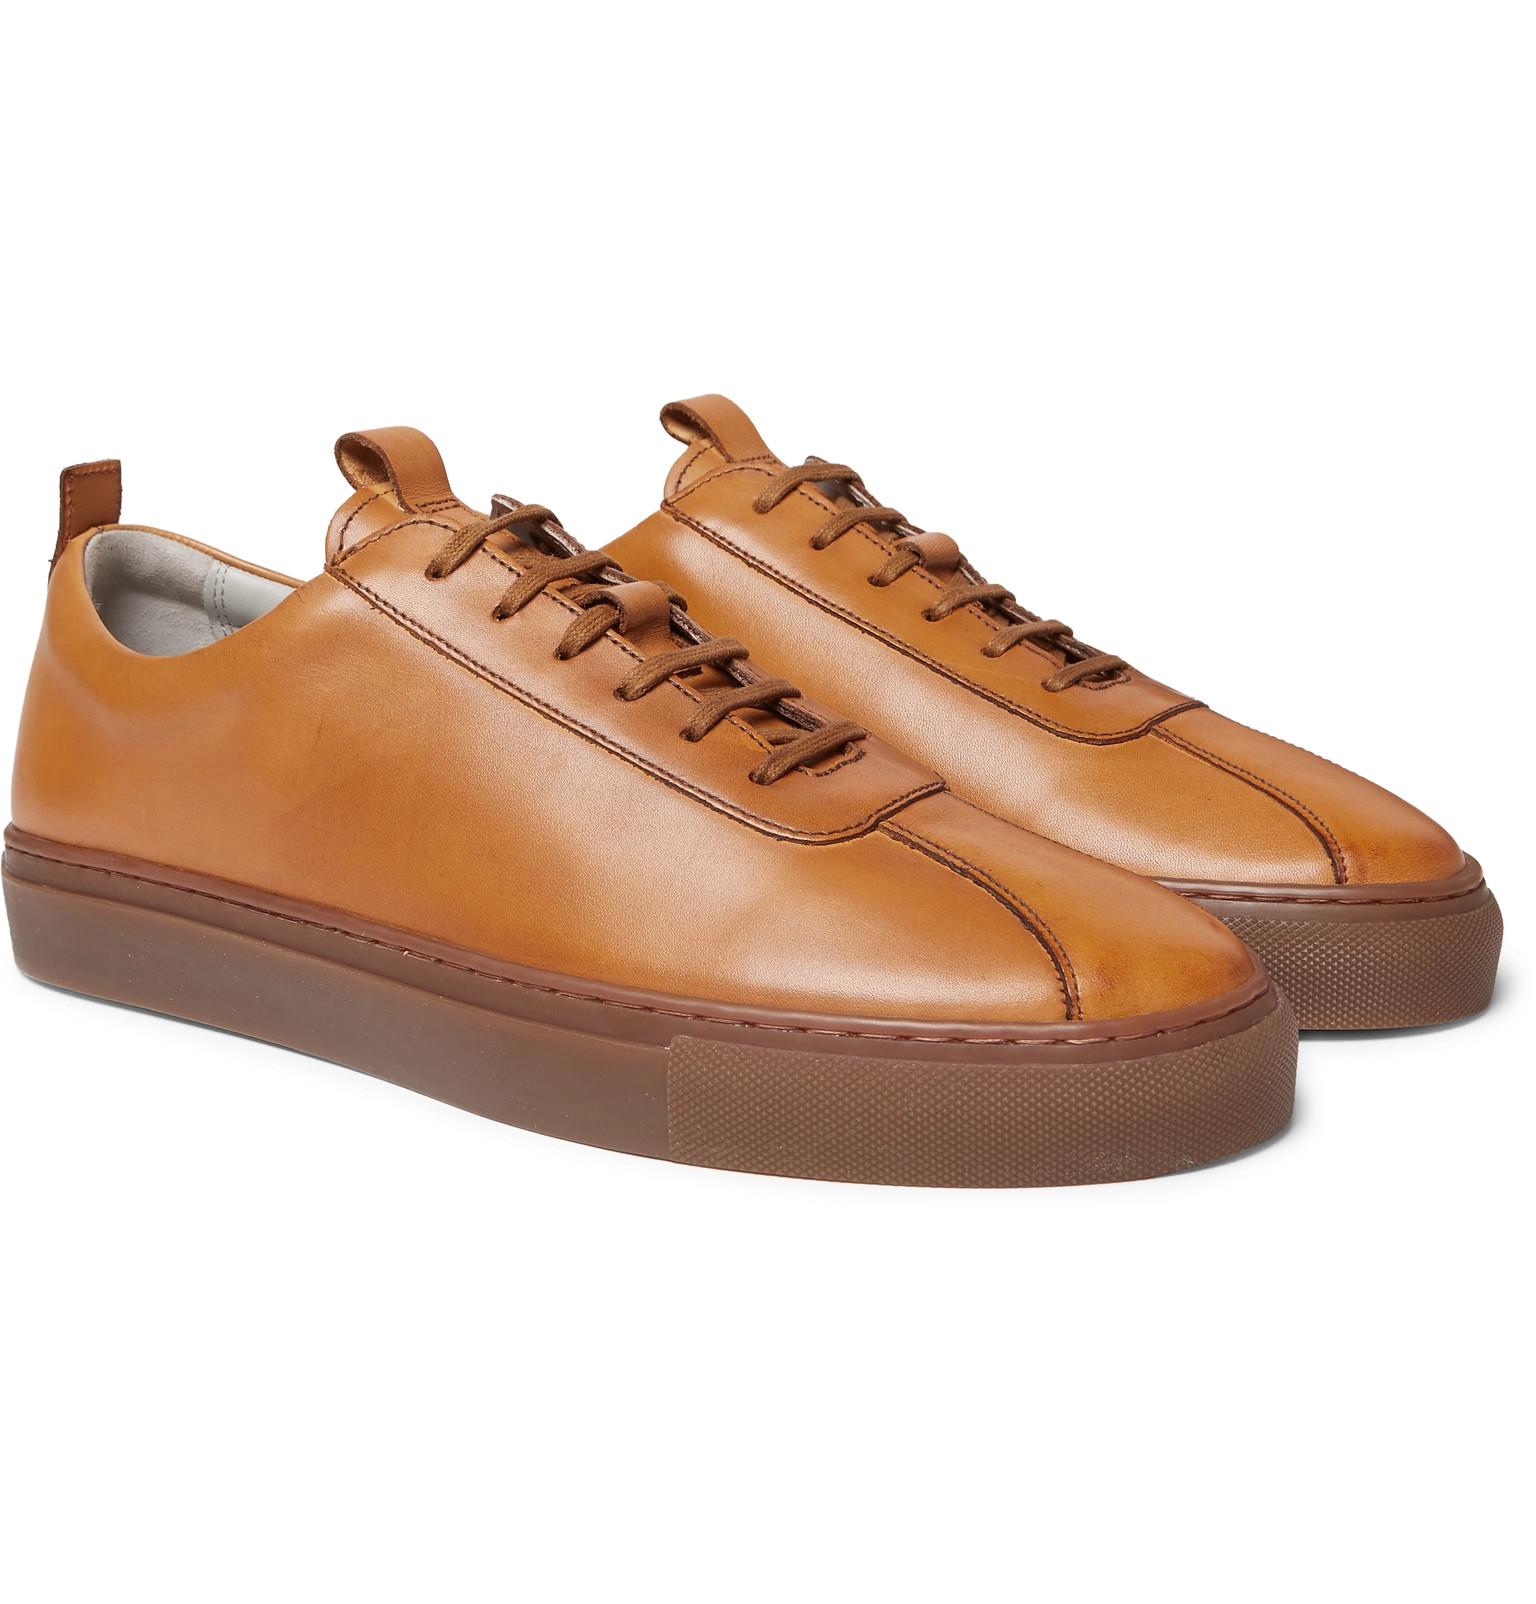 Grenson Leather Sneakers in Brown for Men - Lyst